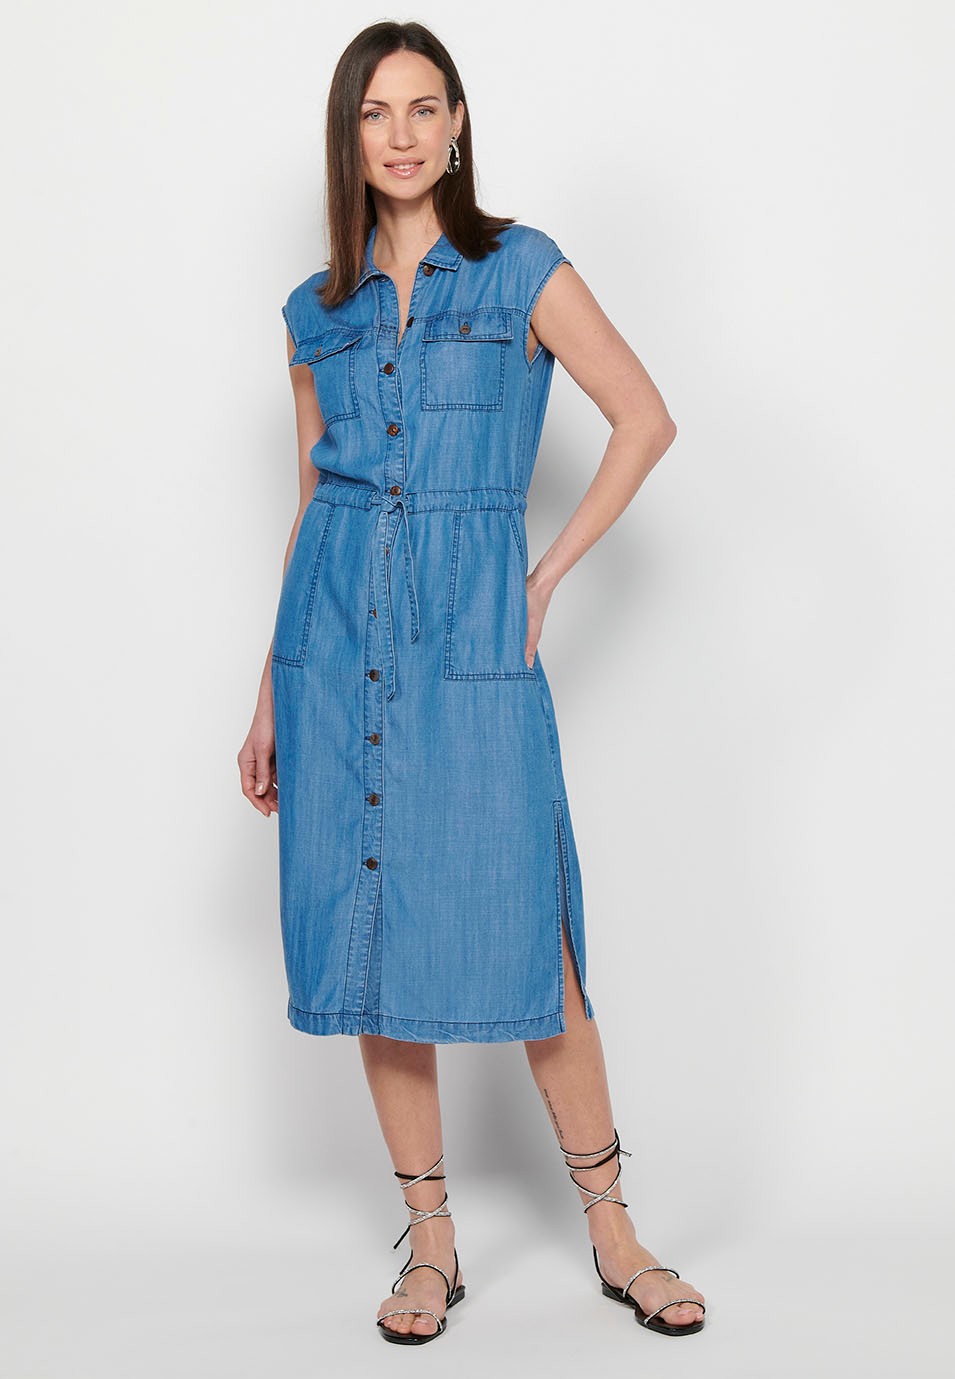 Women's Sleeveless Shirt Style Long Dress with Adjustable Waist with Drawstring and Button Front Closure in Blue